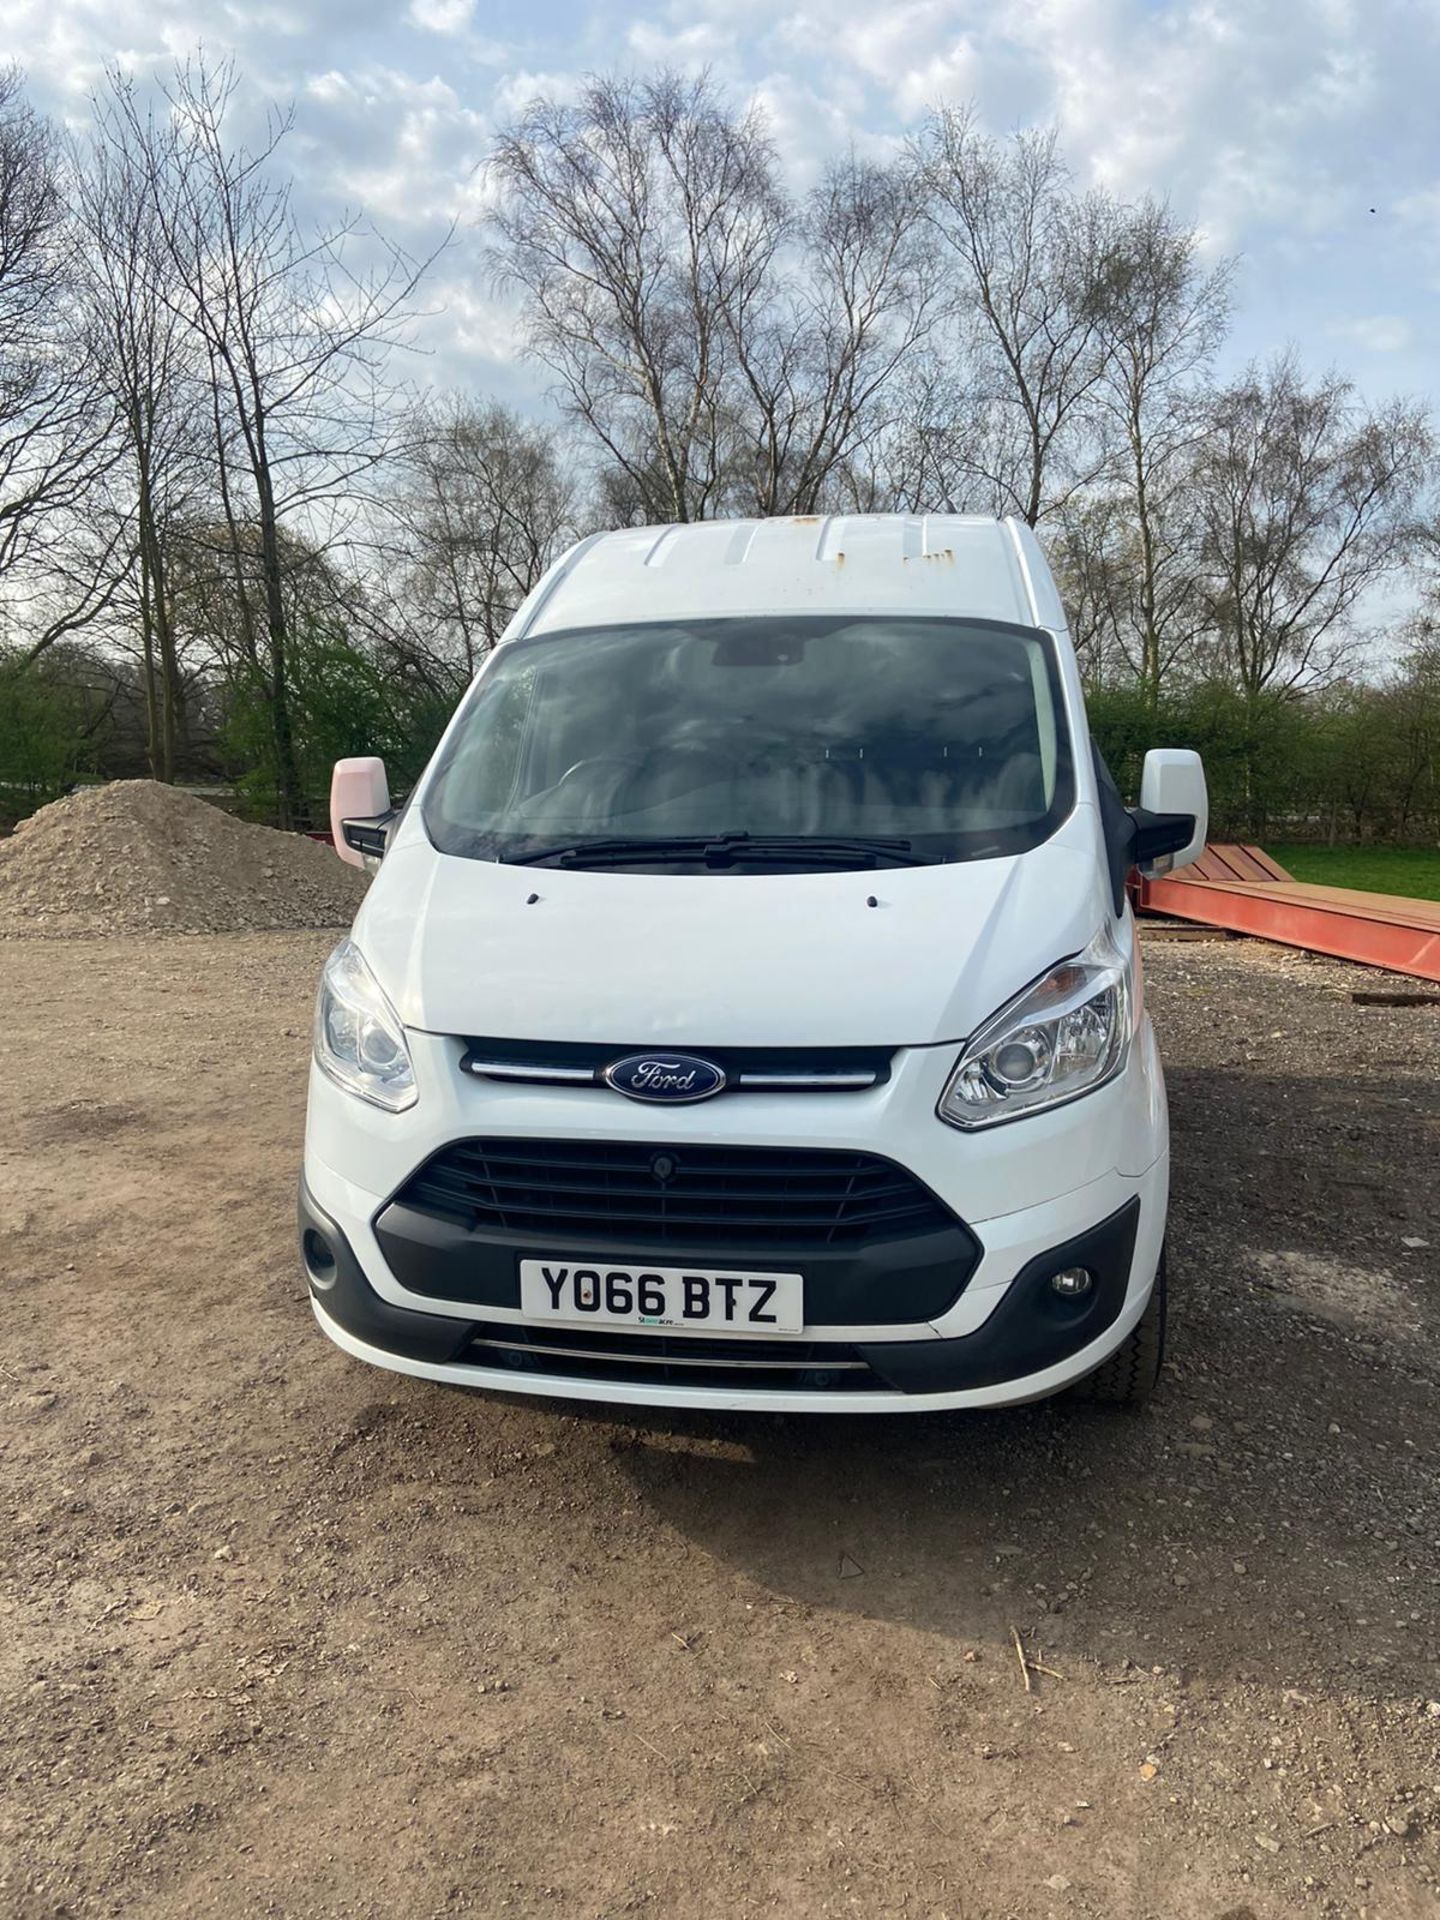 2017 (66) FORD TRANSIT CUSTOM 290 LIMITED, HEATED DRIVES SEATS, AIR CON *PLUS VAT* - Image 3 of 10